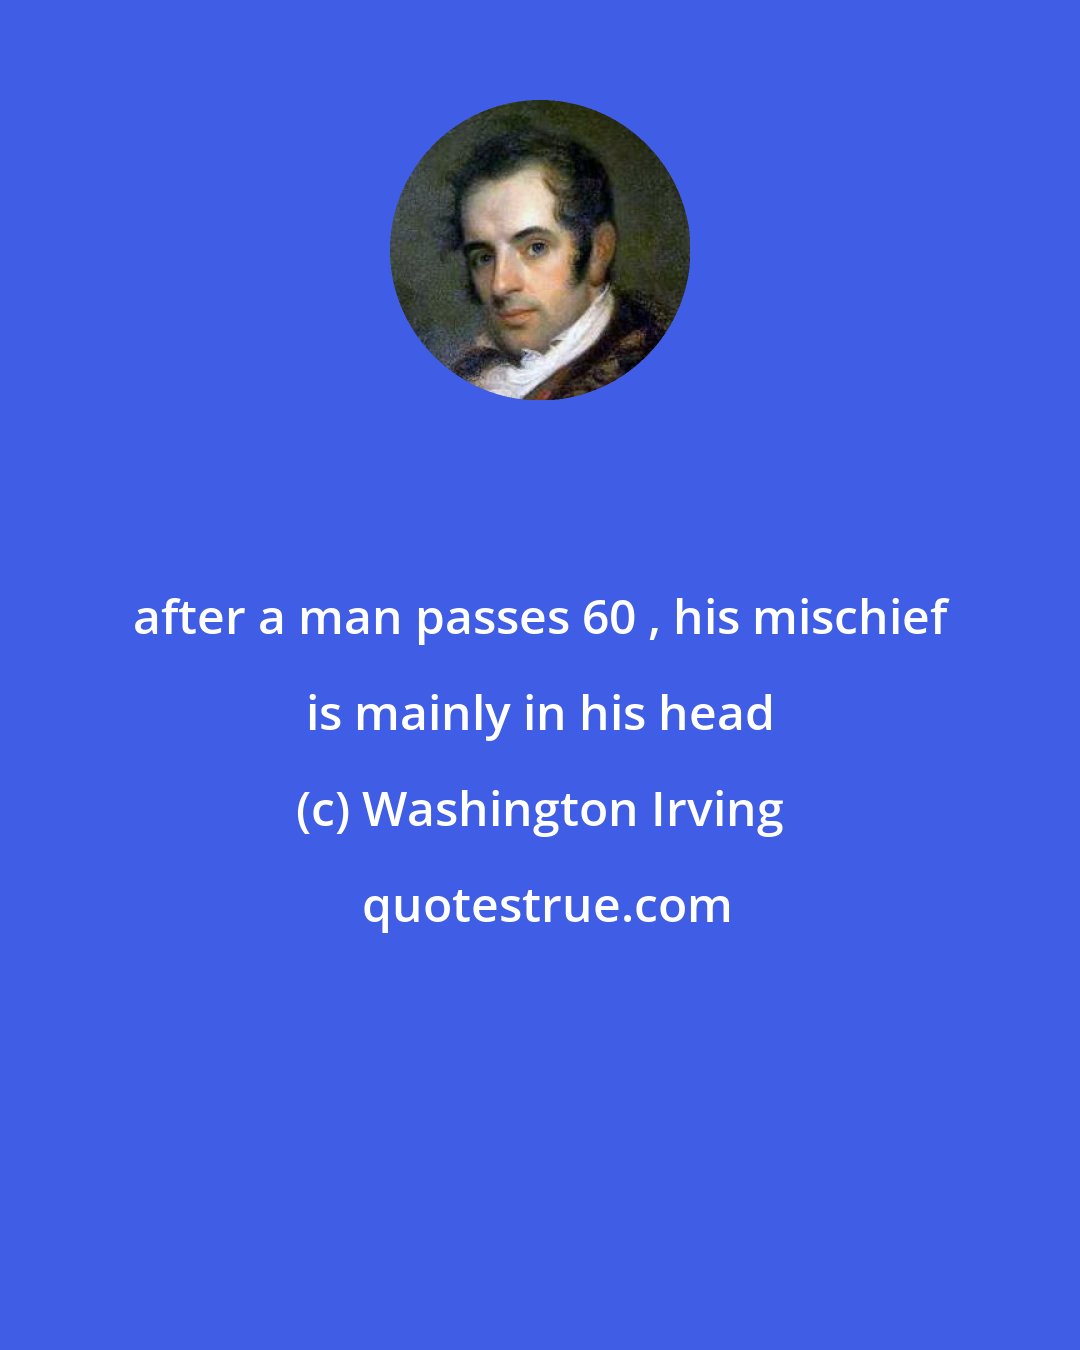 Washington Irving: after a man passes 60 , his mischief is mainly in his head